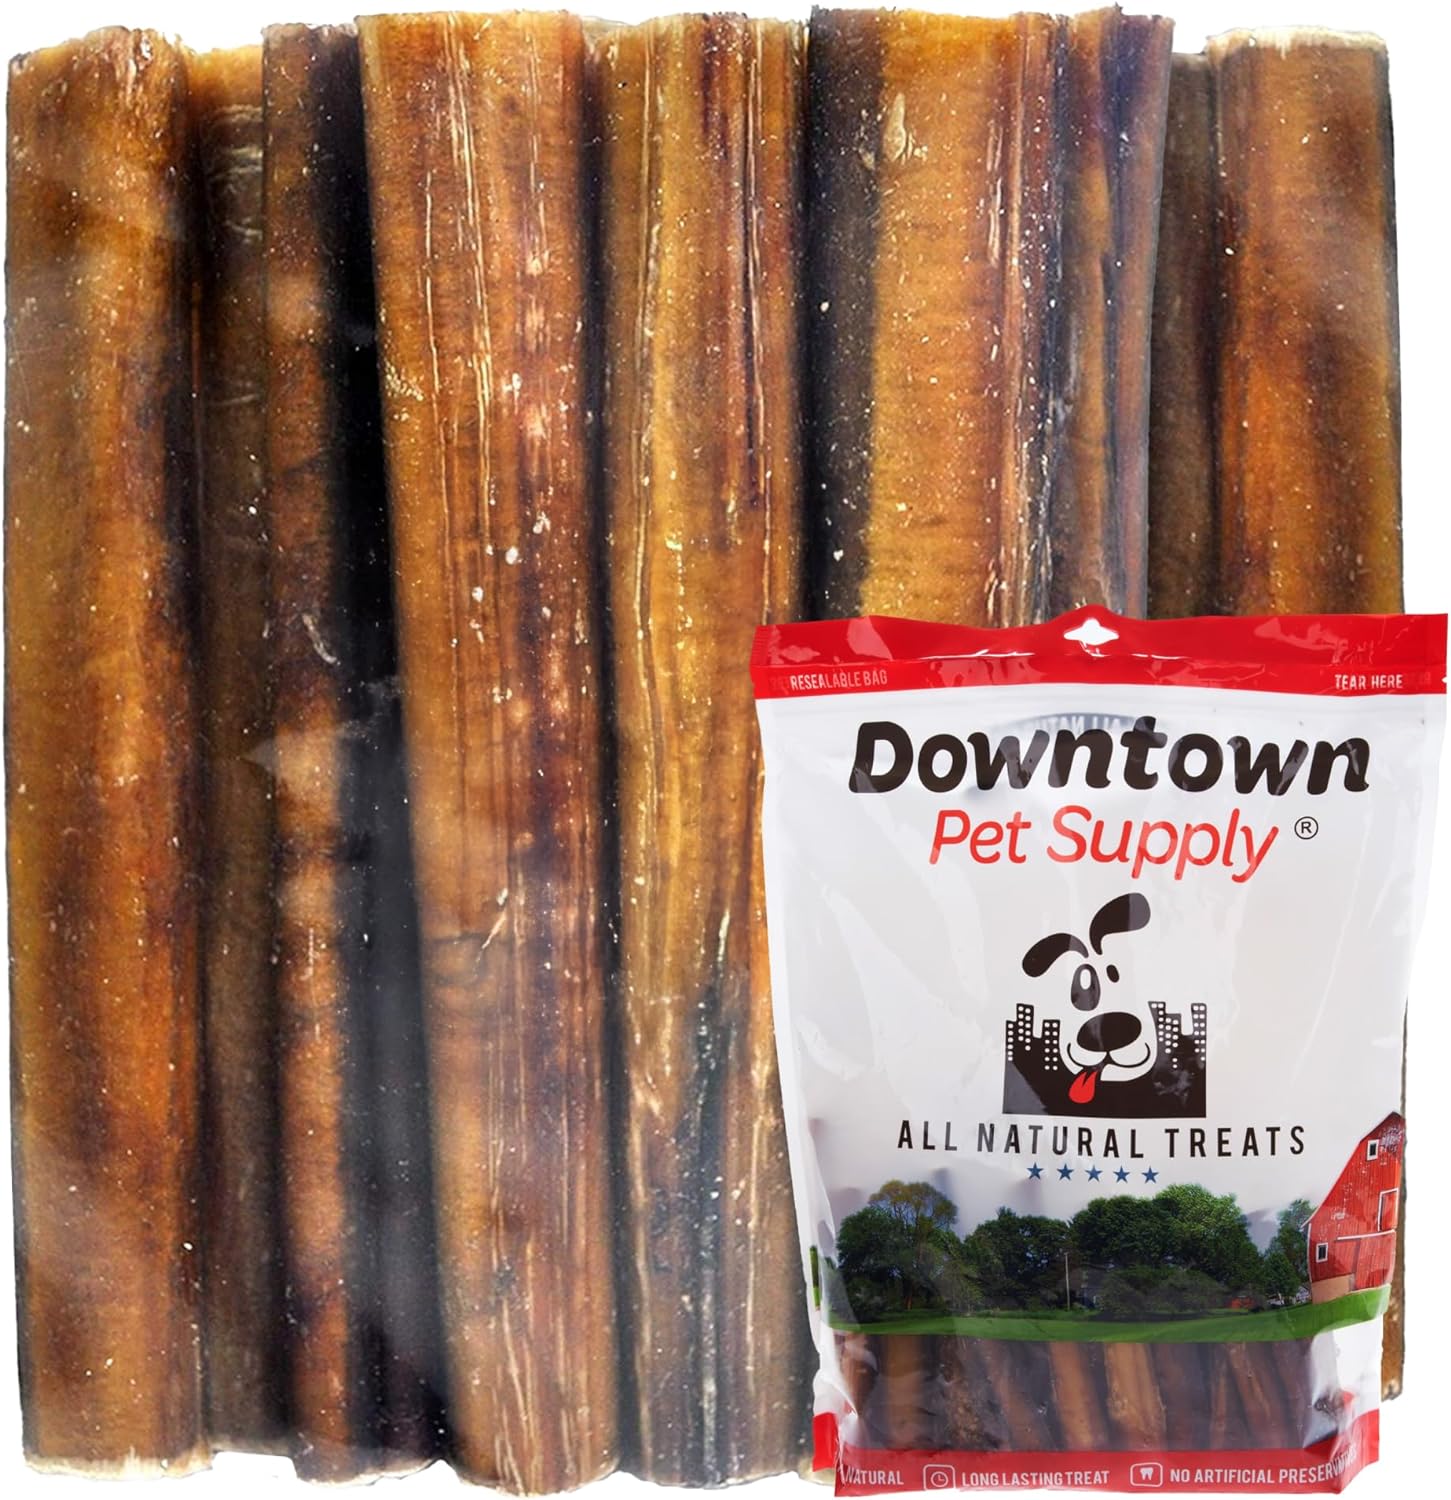 Downtown Pet Supply Bully Sticks for Dogs (6", 24-Pack, Jumbo) Non-GMO, Grain Free, Rawhide Free Dog Chews Long Lasting Pizzle Sticks - Low Odor Bully Sticks for Large Dogs